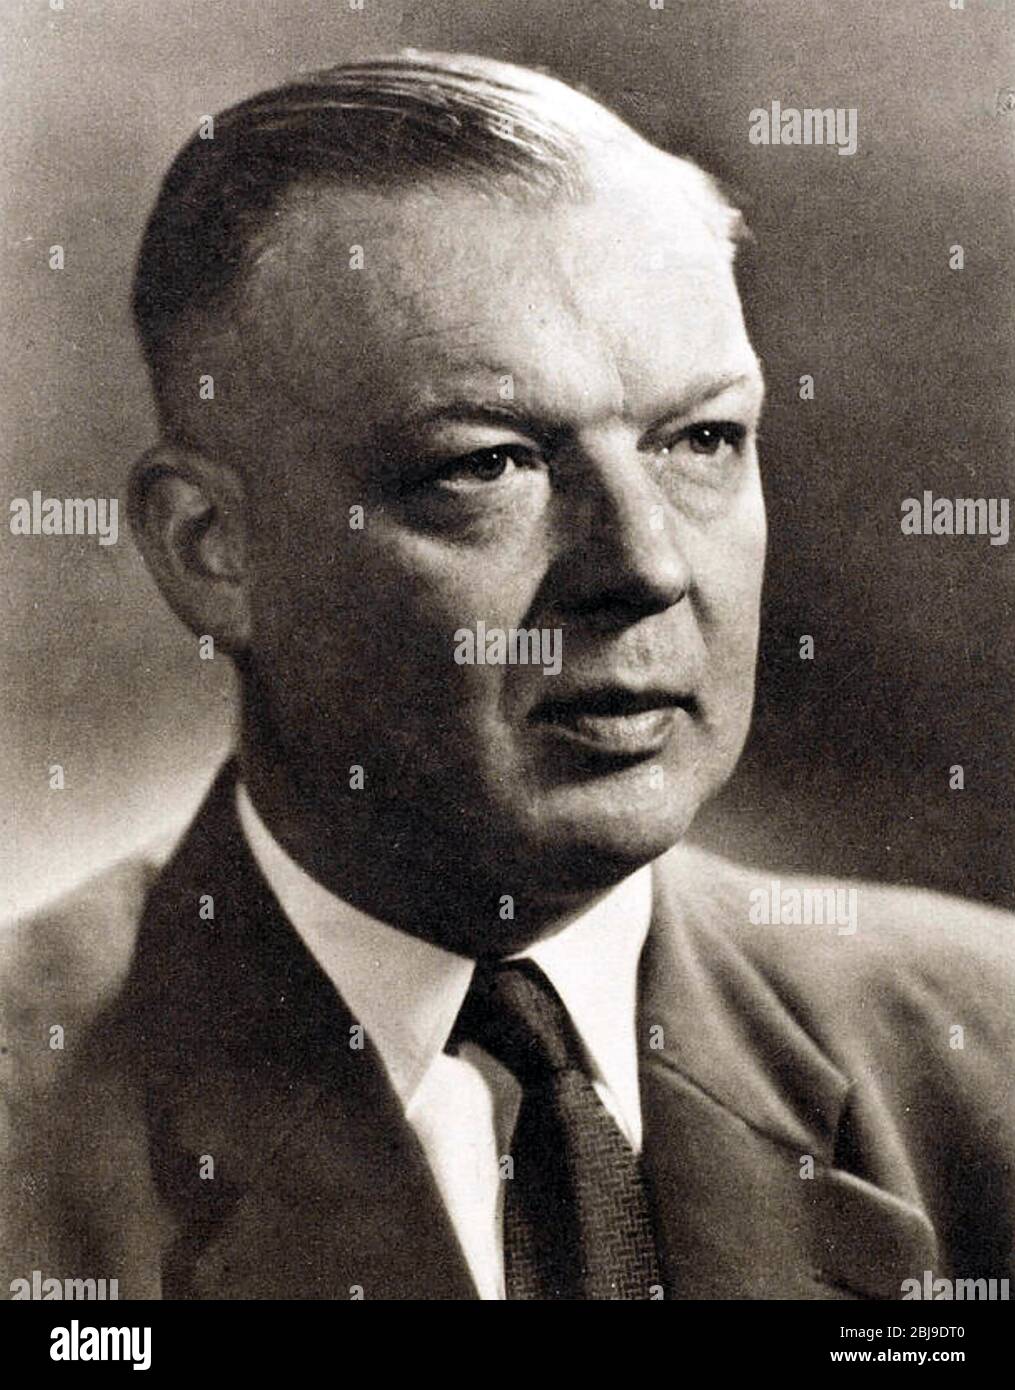 WERNER FORSSMANN (1904-1979) German physician and Nobel Prize Winner for who jointly pioneered cardiac catheterization Stock Photo